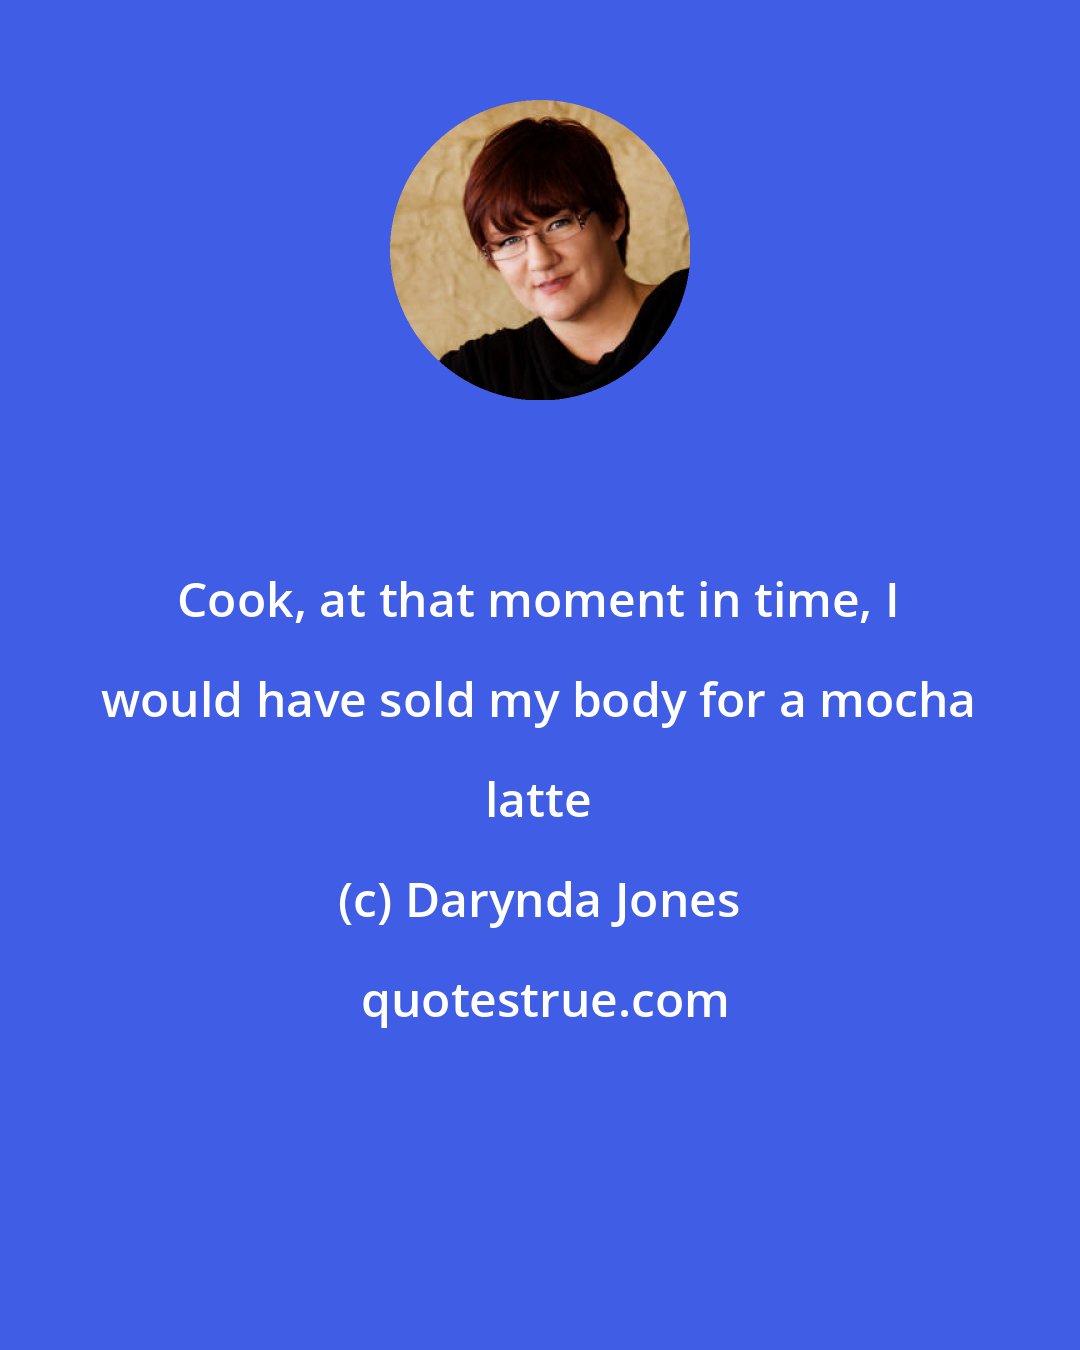 Darynda Jones: Cook, at that moment in time, I would have sold my body for a mocha latte